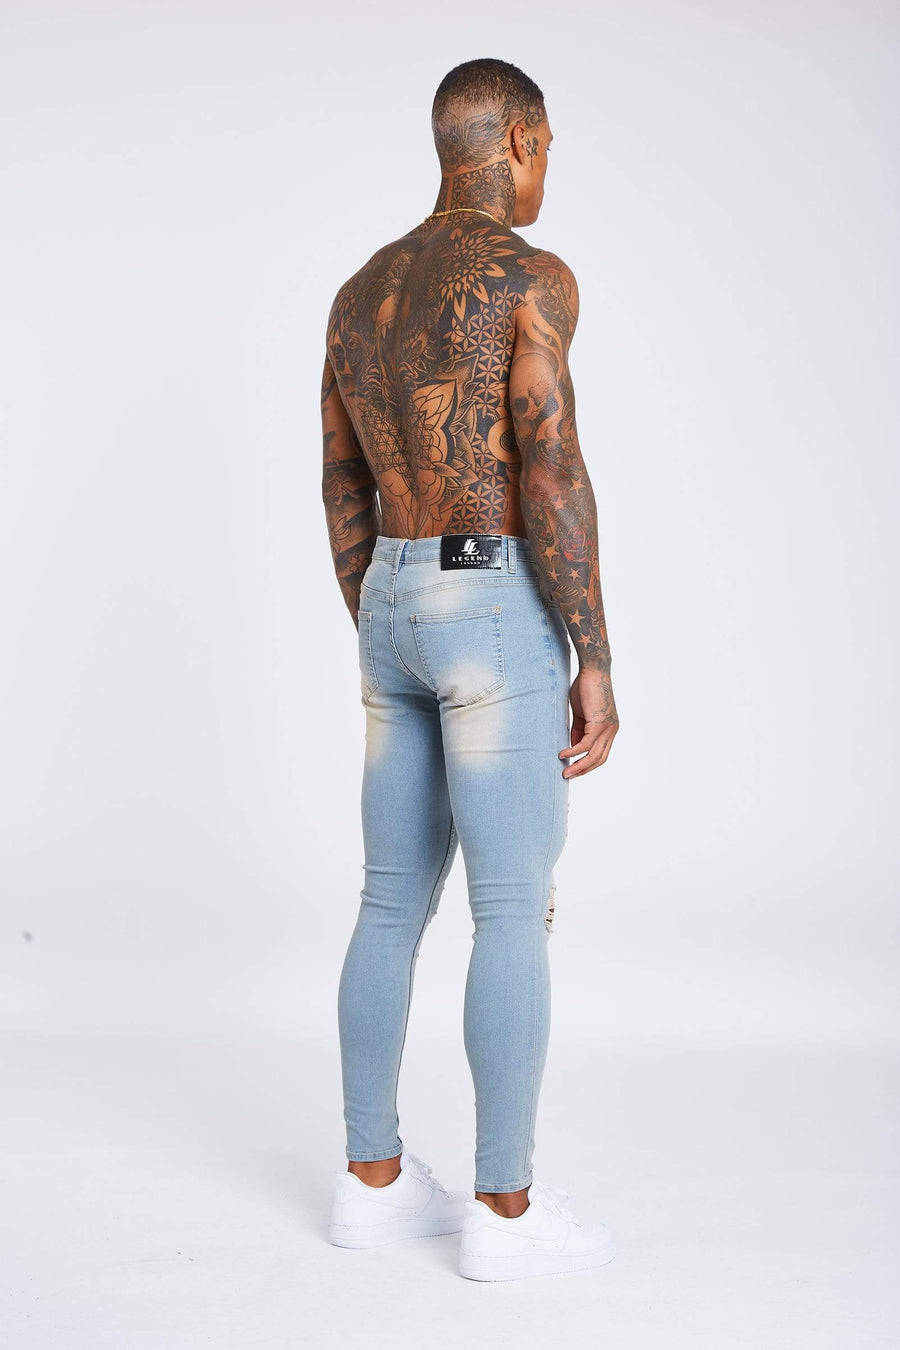 Legend London Jeans Stone Washed Jeans - Ripped & Repaired